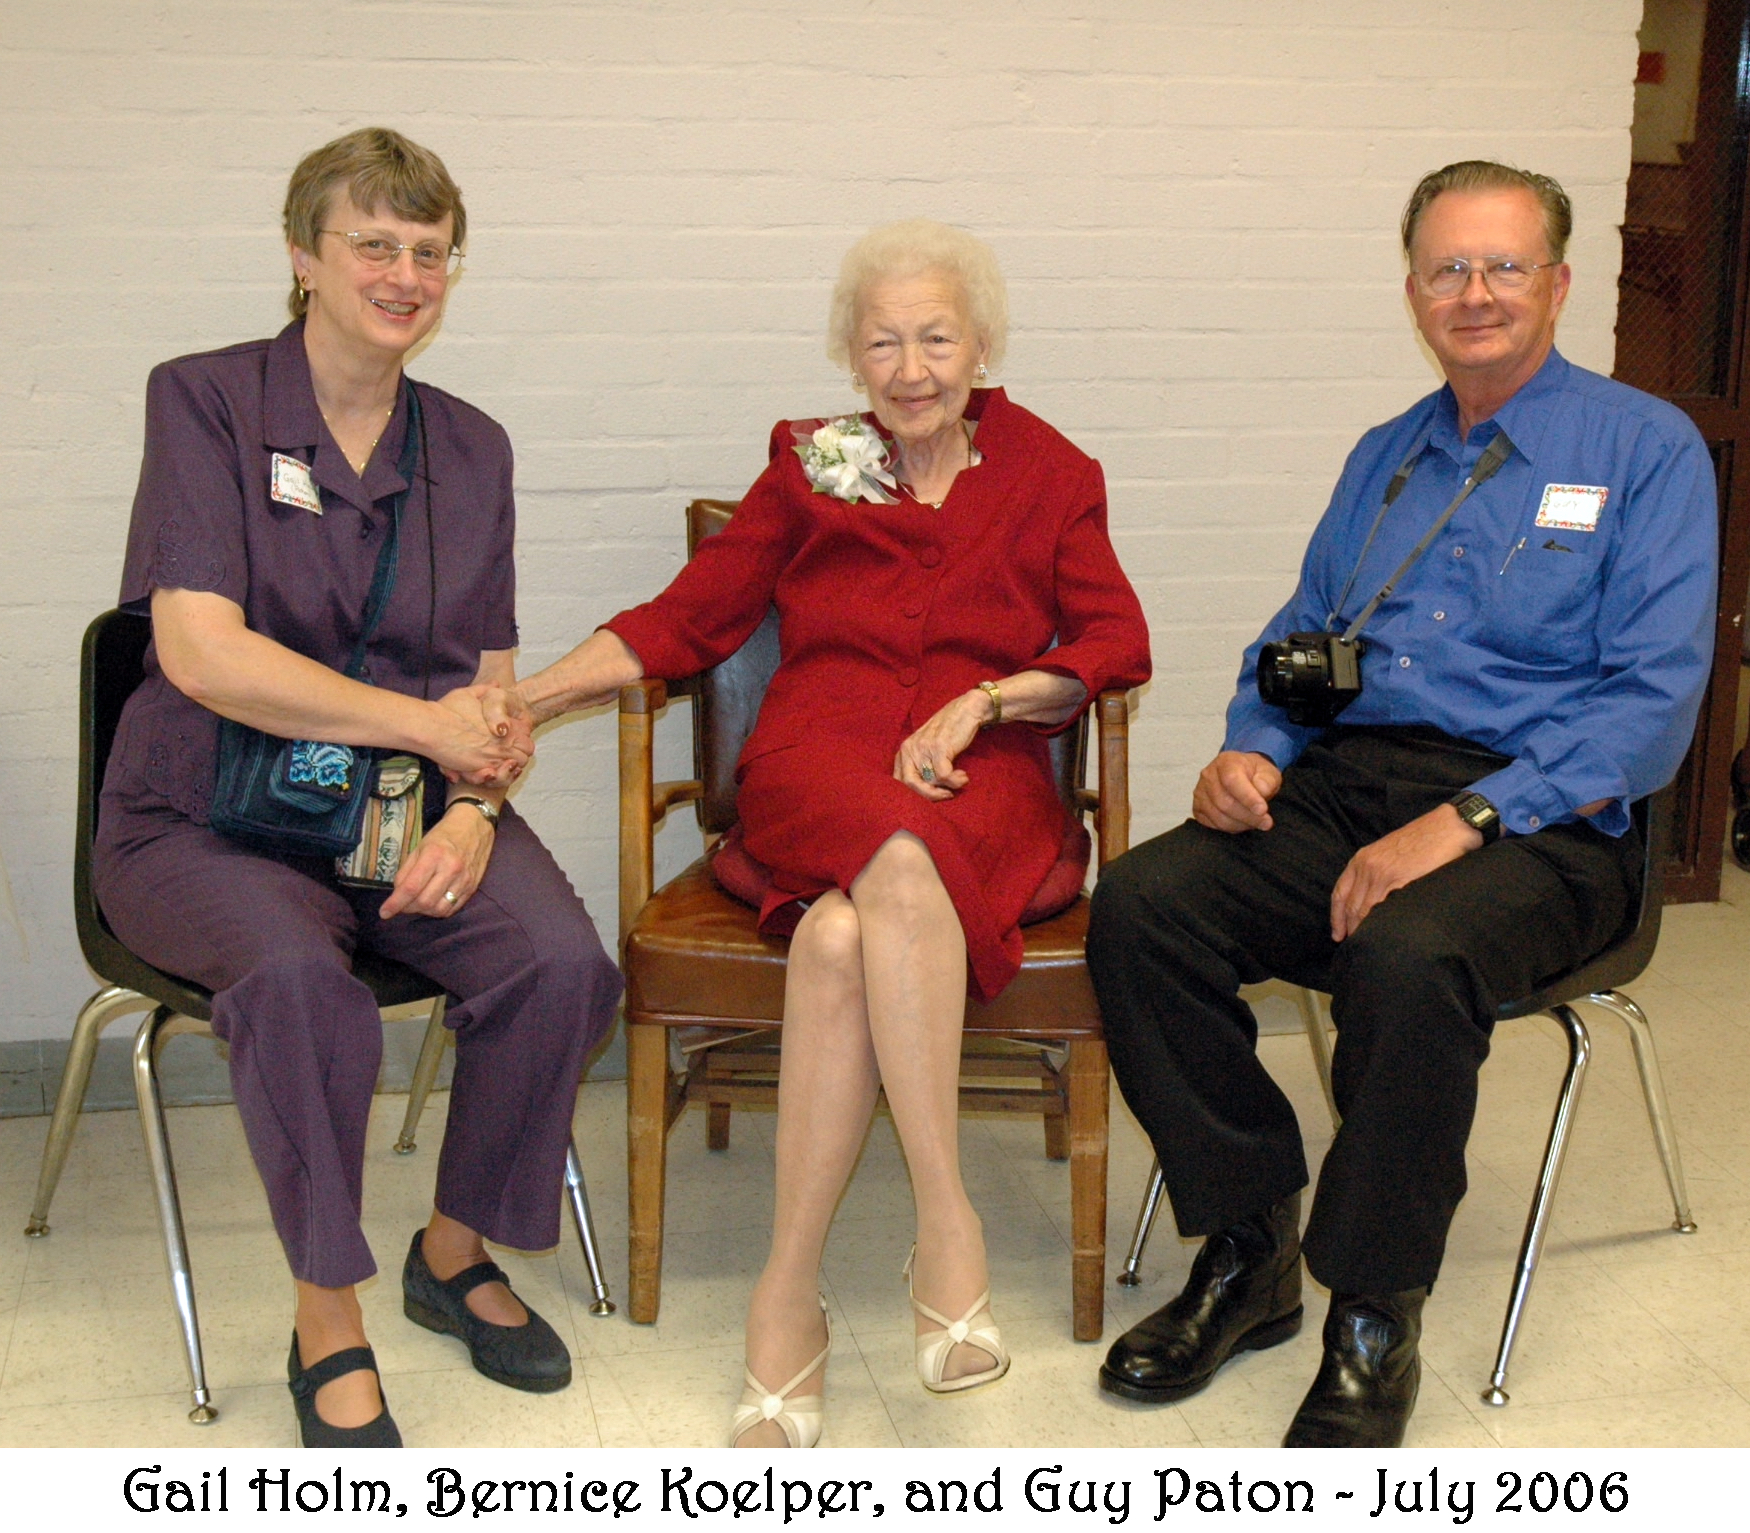 Gail Holm, Bernice Koelper, and Guy Paton sitting together